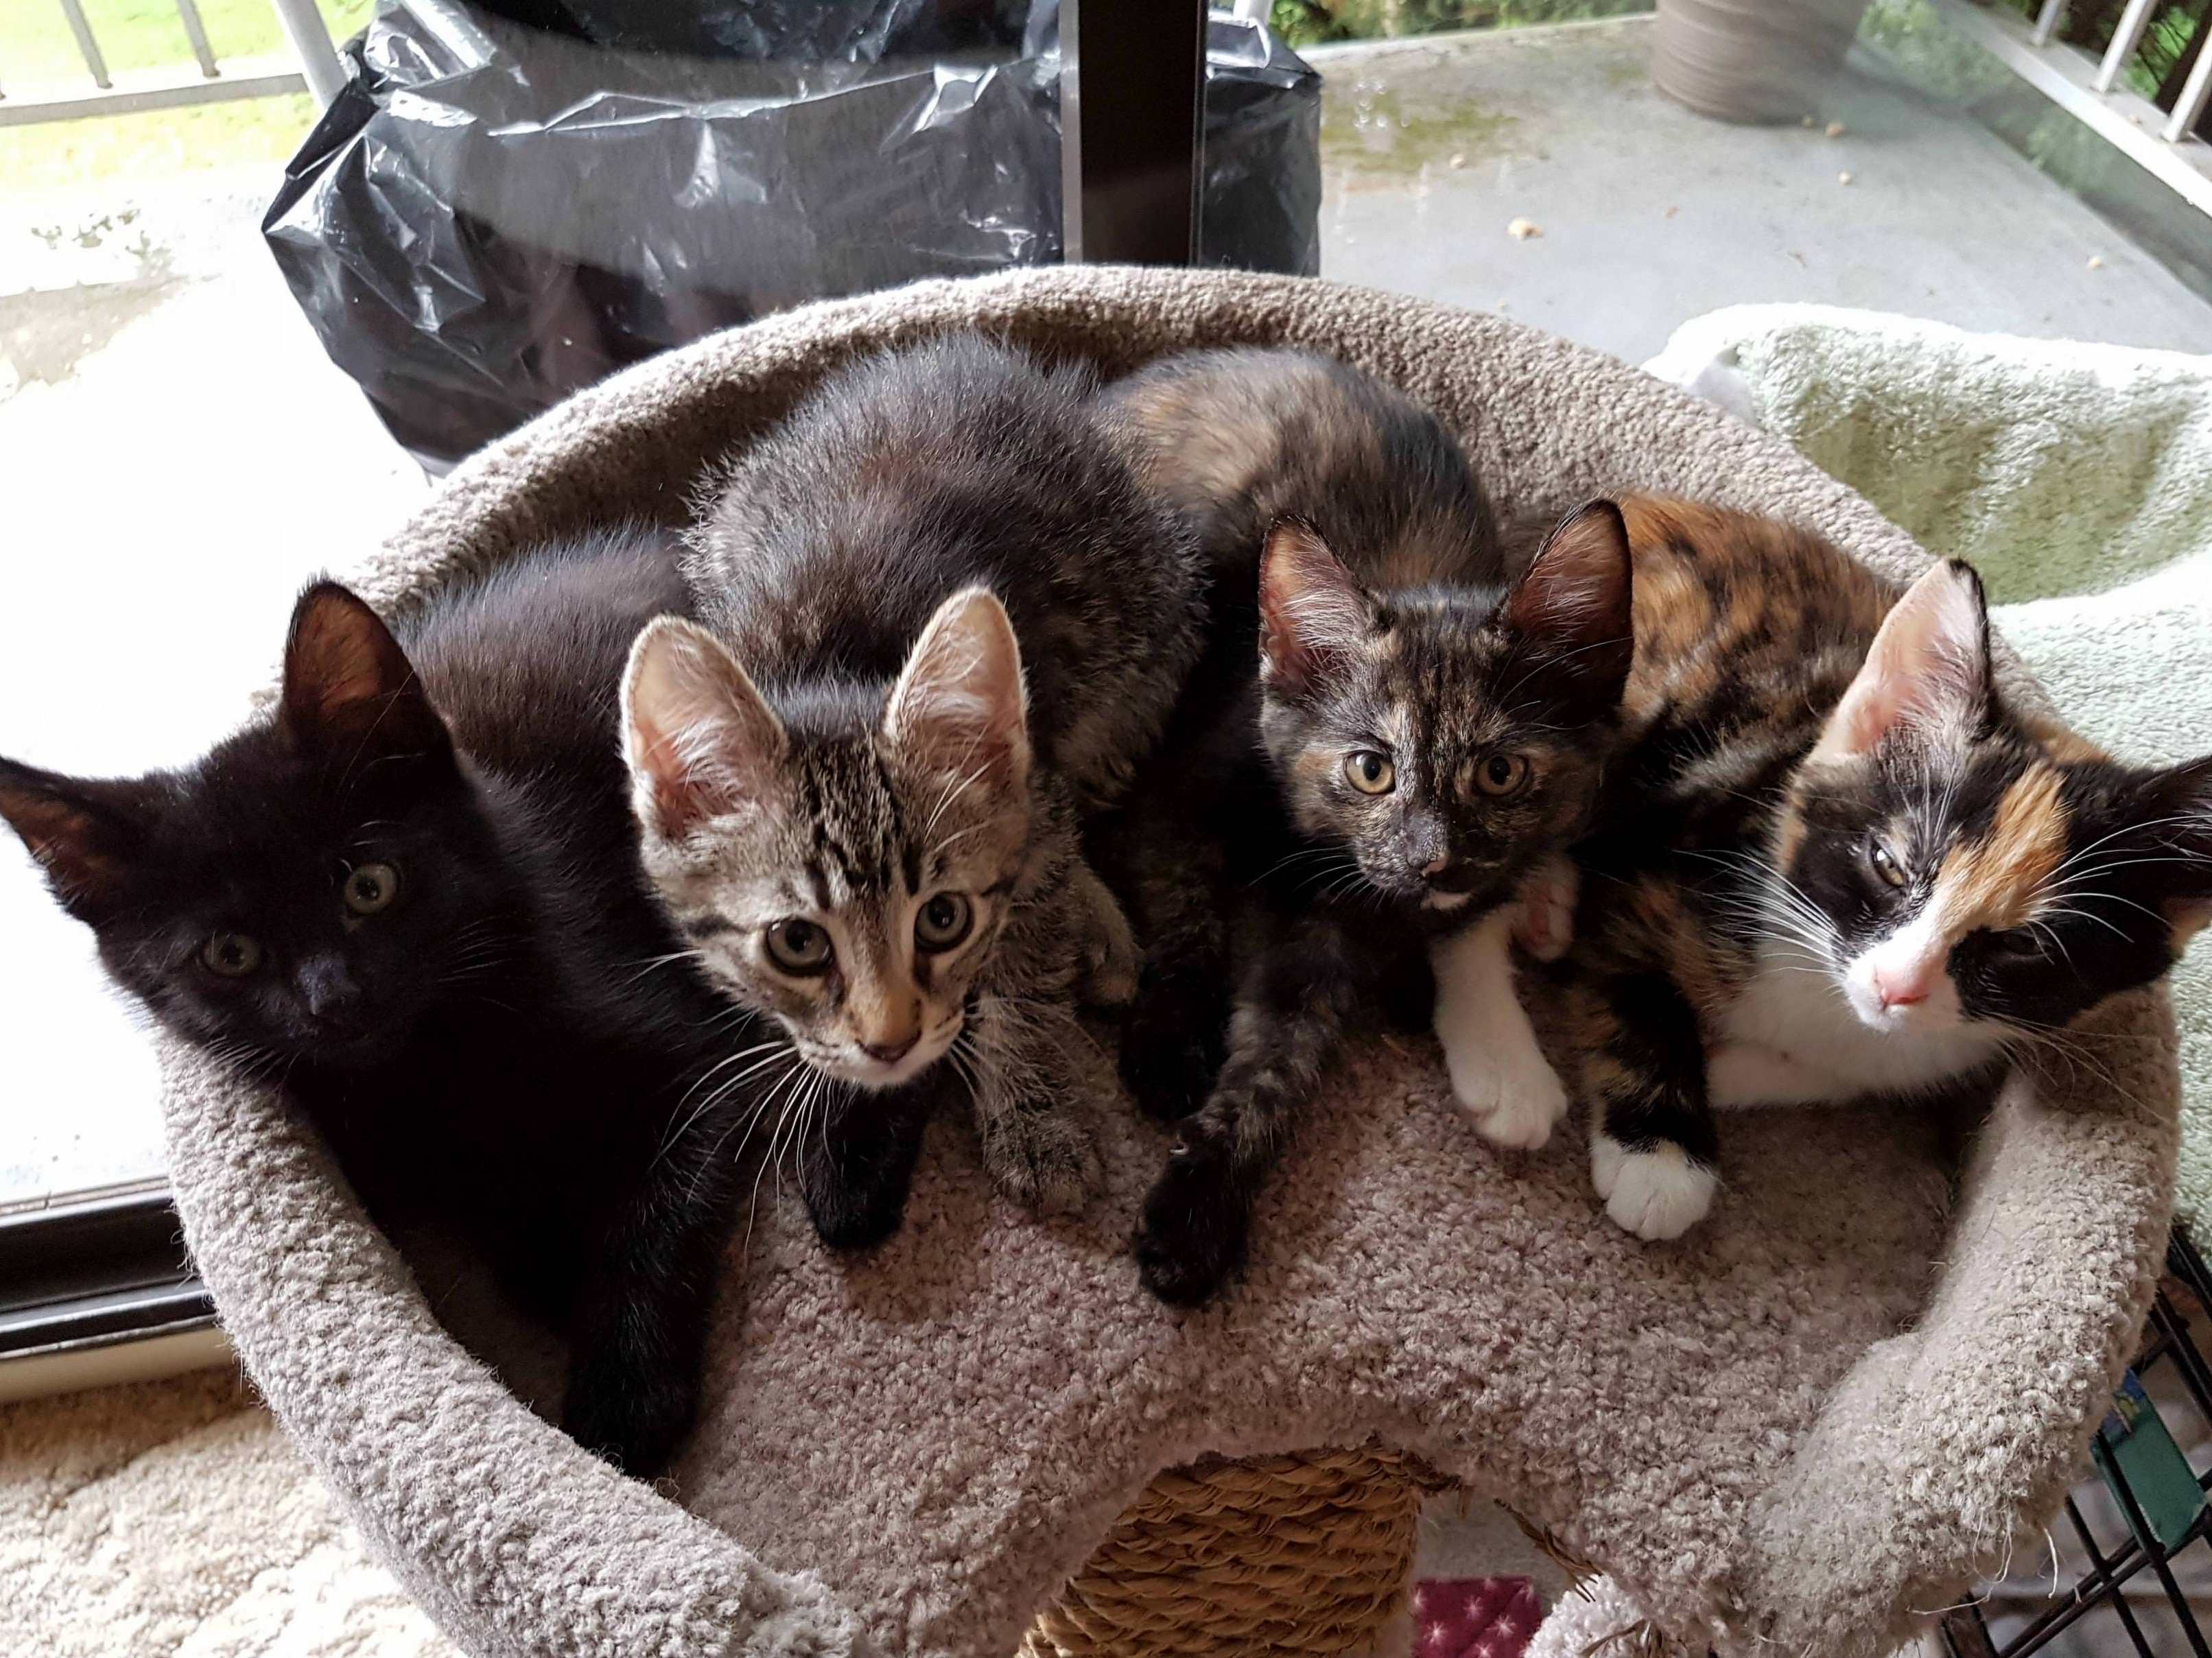 Yall seemed to enjoy the cuddlepuddle. so heres four of the five hanging out on the perch.